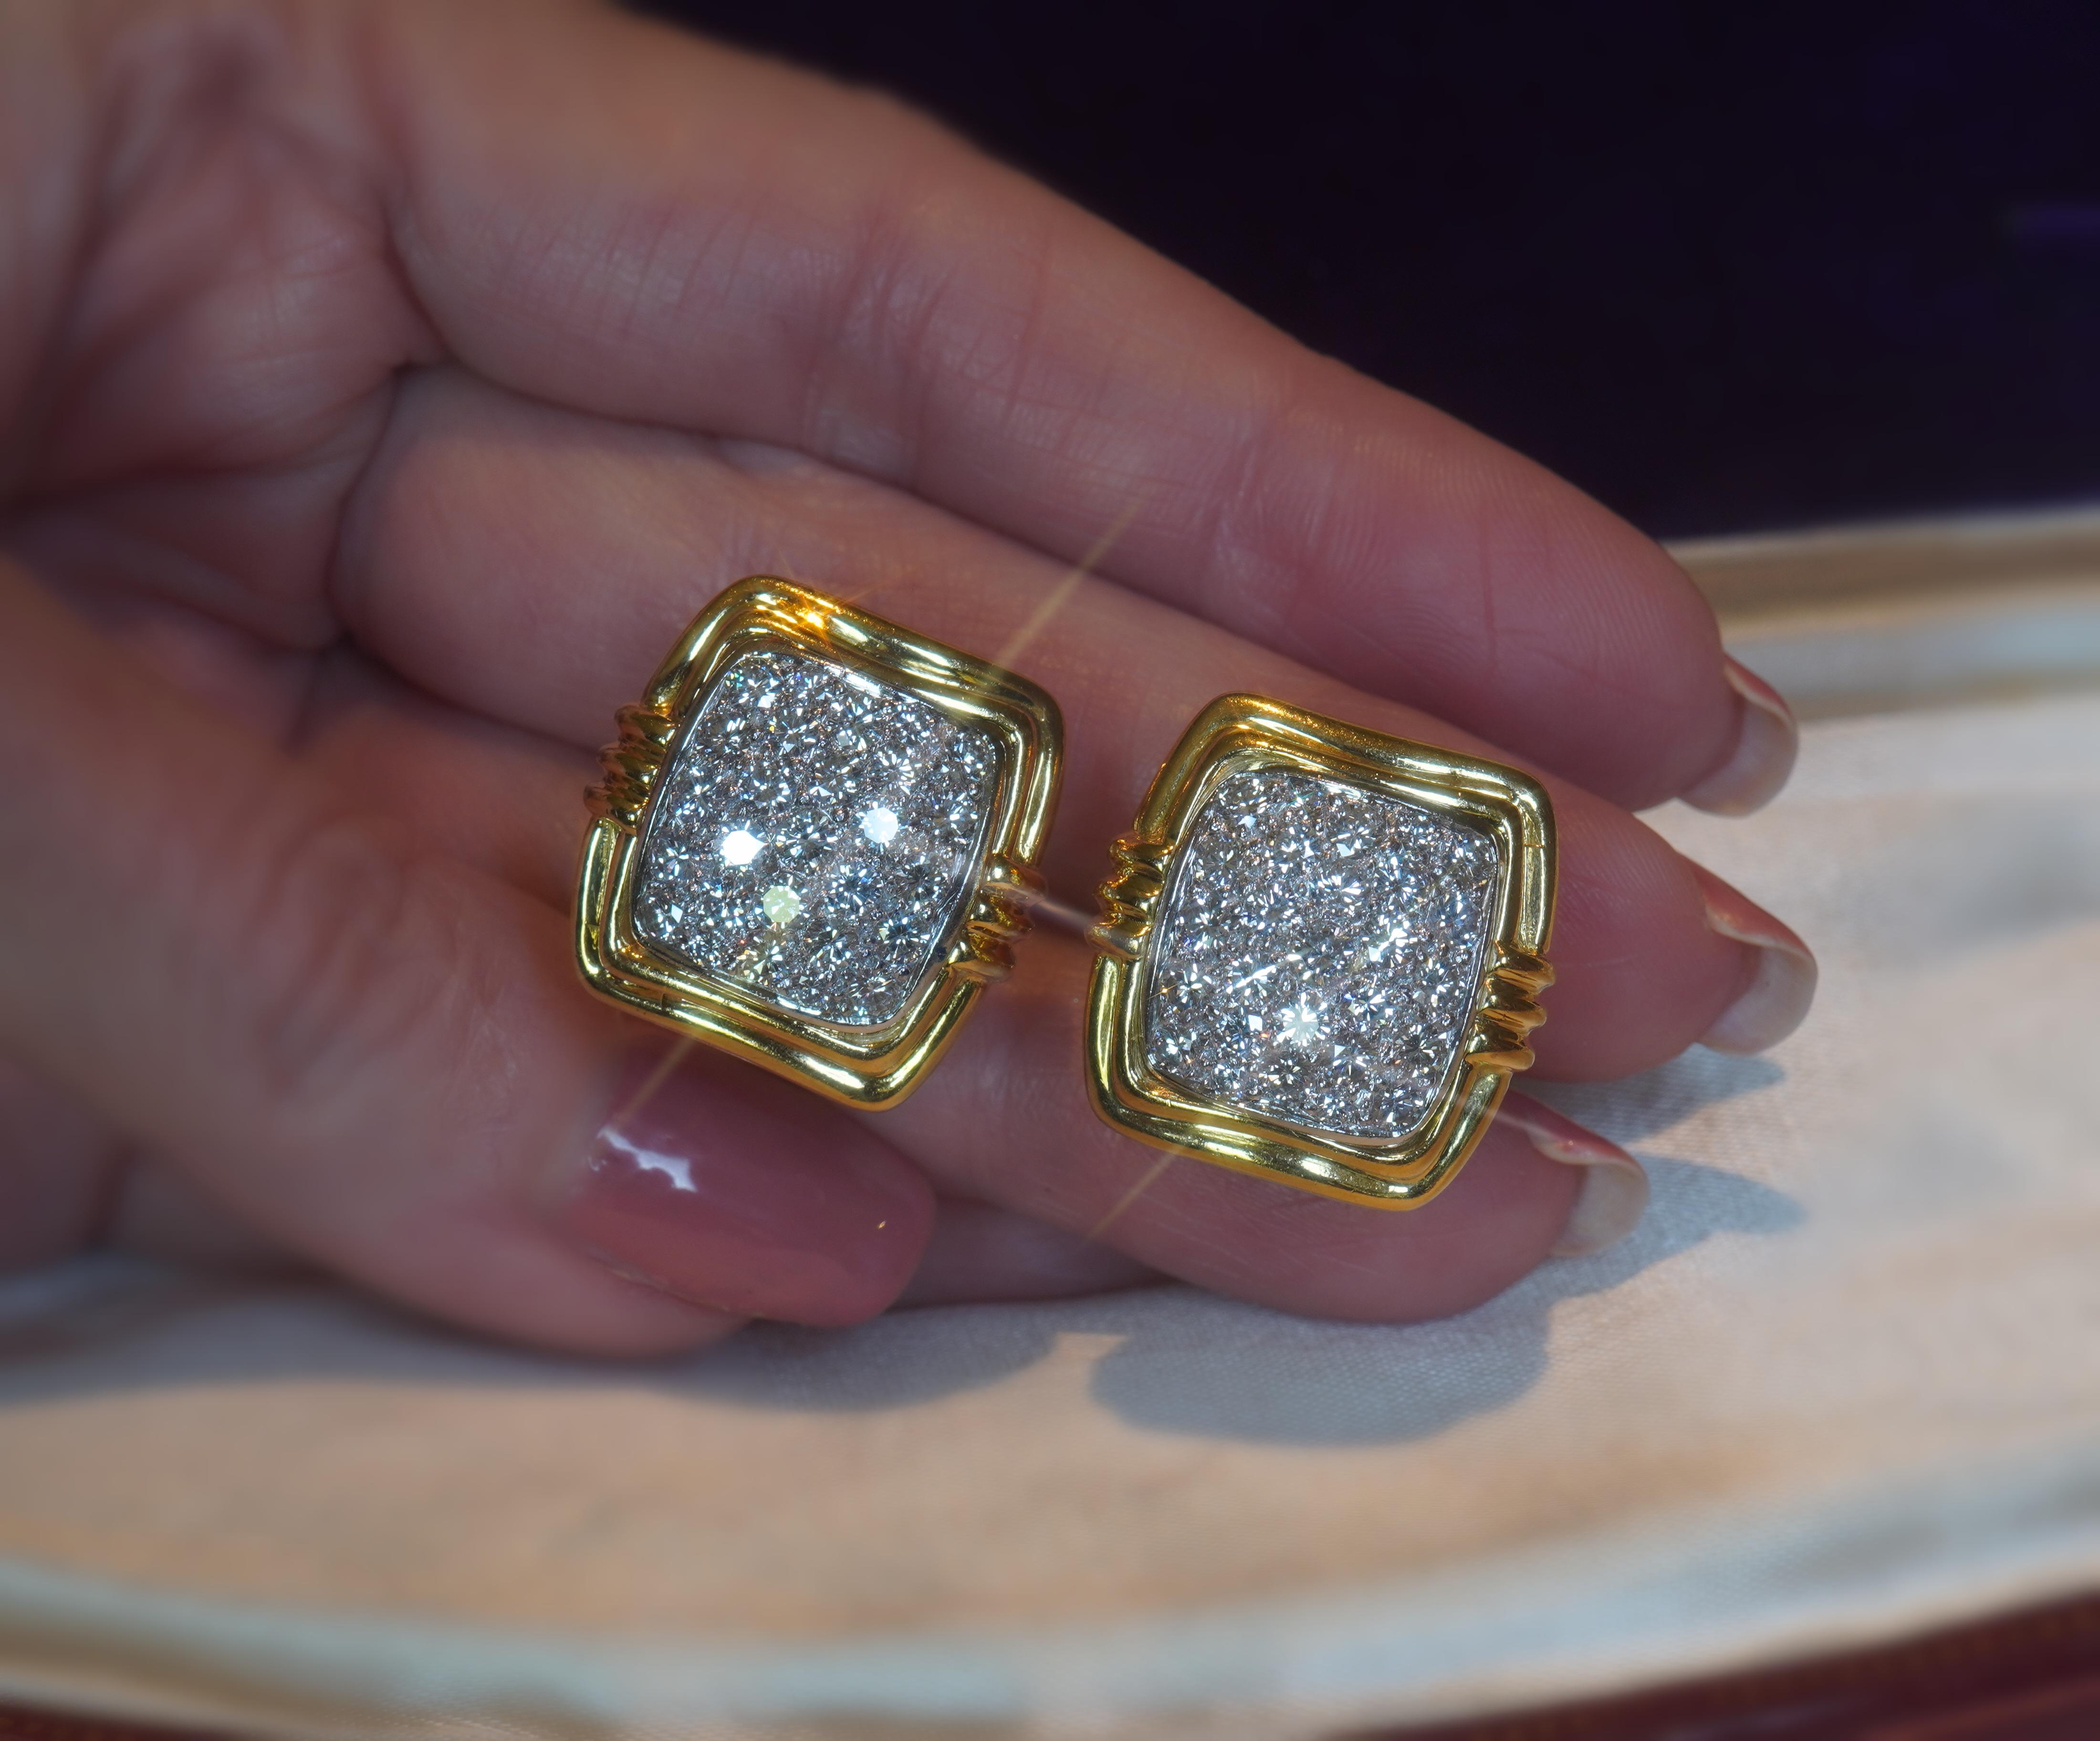 Old South Jewels proudly presents.... 
LUXURY.    GIA CERTIFIED GORGEOUS 4.86 CARATS DIAMOND VINTAGE EARRINGS SET IN SOLID PLATINUM & 18K GOLD!    Huge Vintage Bright Sparkling Diamond FINEST VVS WHITE DIAMONDS--Stunning!   

Very Classy...These